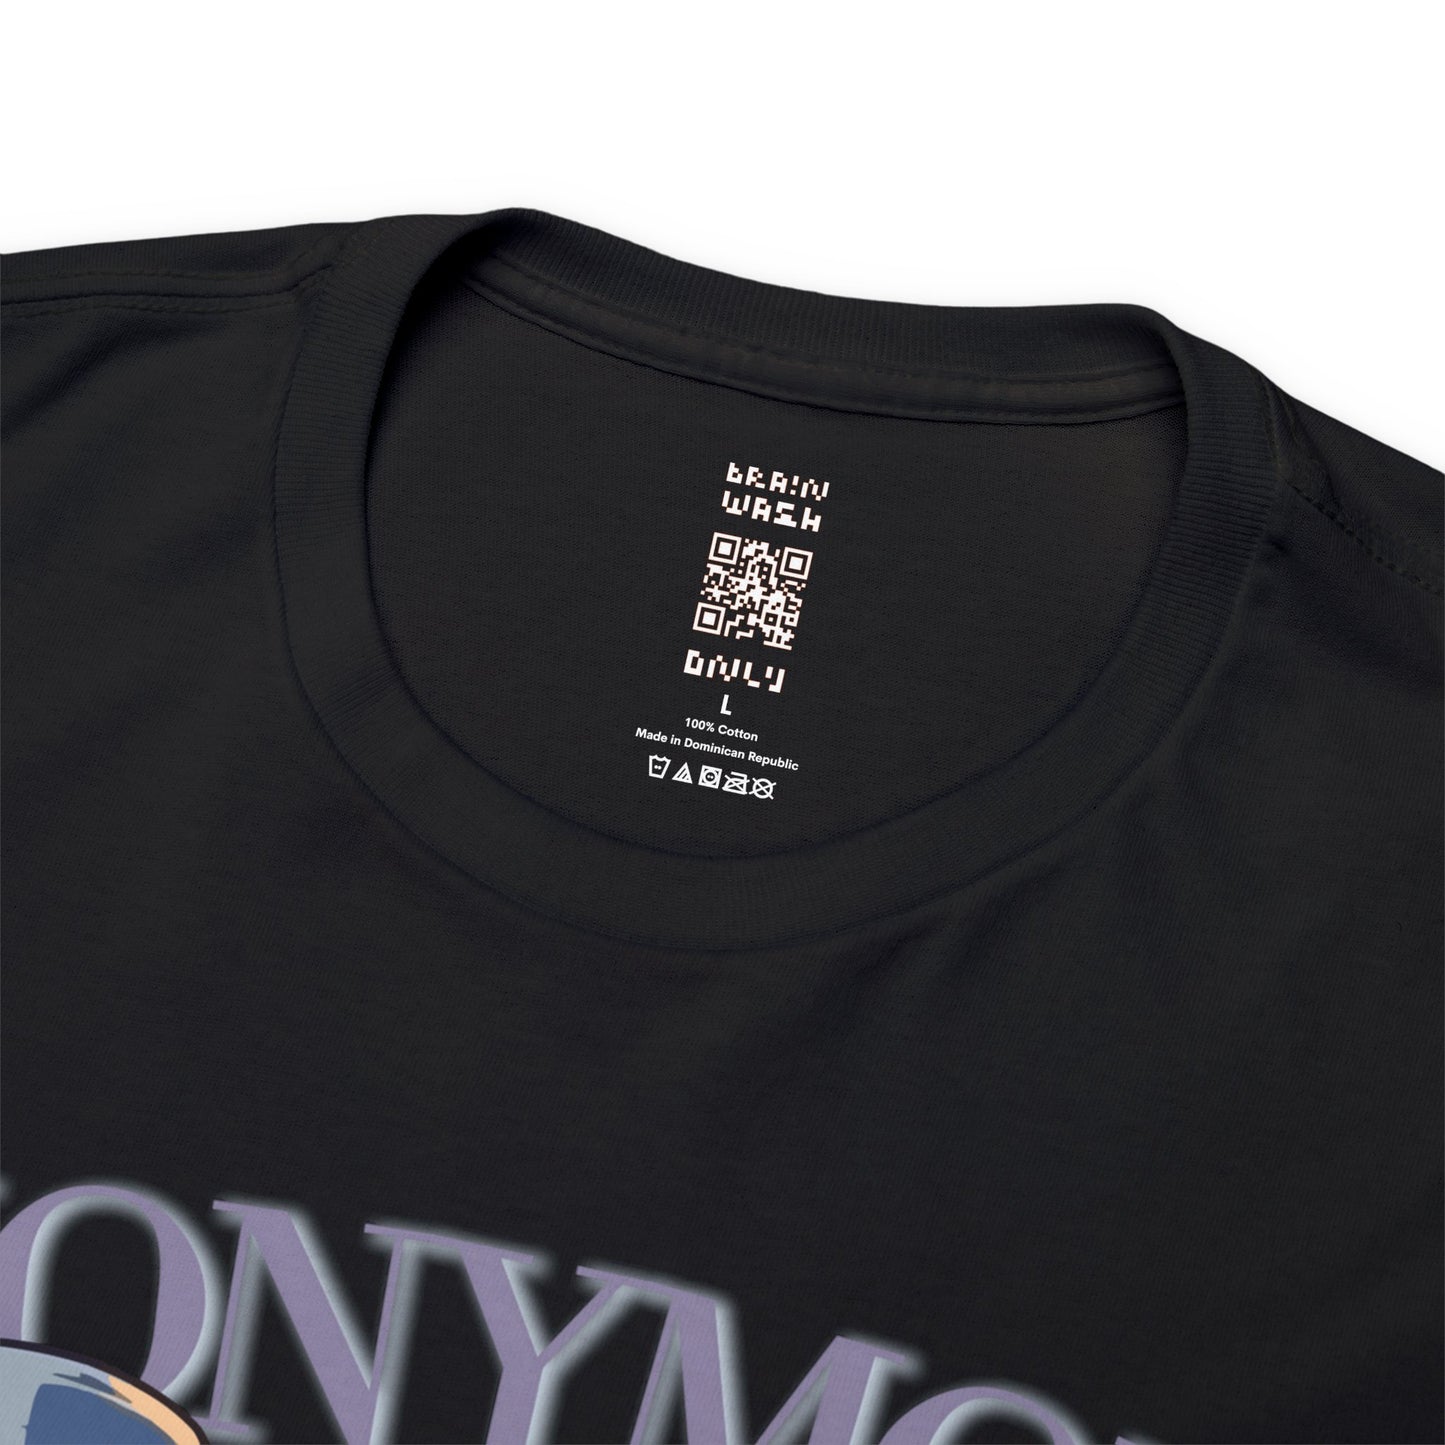 Anonymous Homage T-Shirt